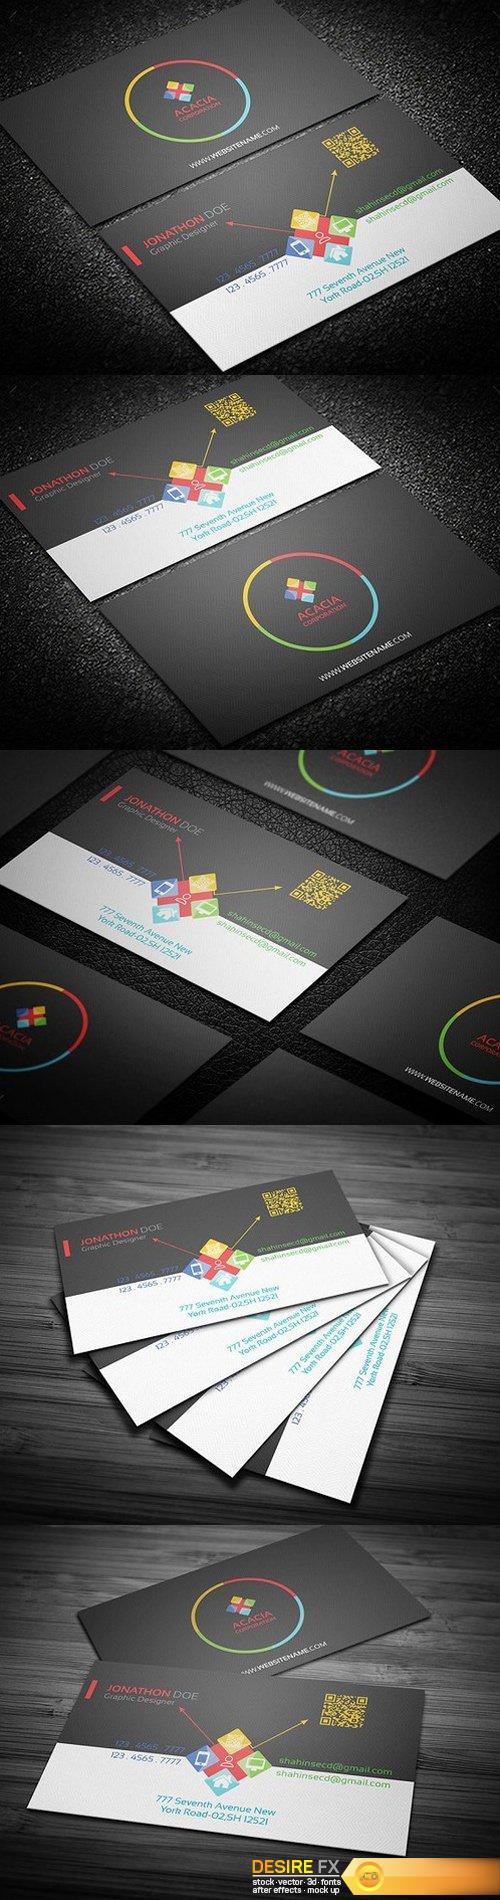 _infographic-business-card-